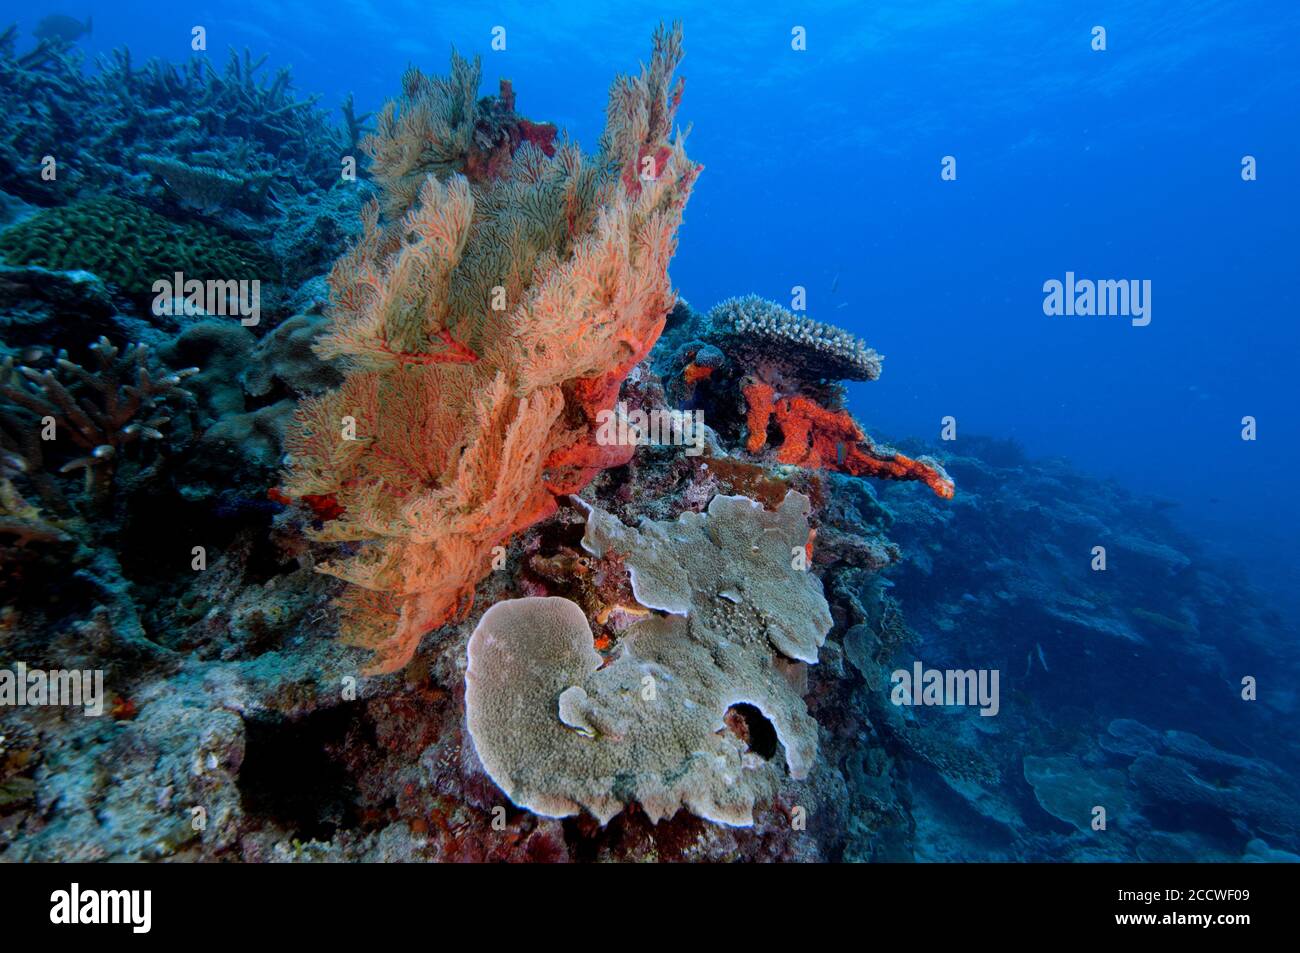 A red soft coral, possibly Anthothelidae, close to a table coral, Acropora sp., Heron Island, Great Barrier Reef, Australia Stock Photo